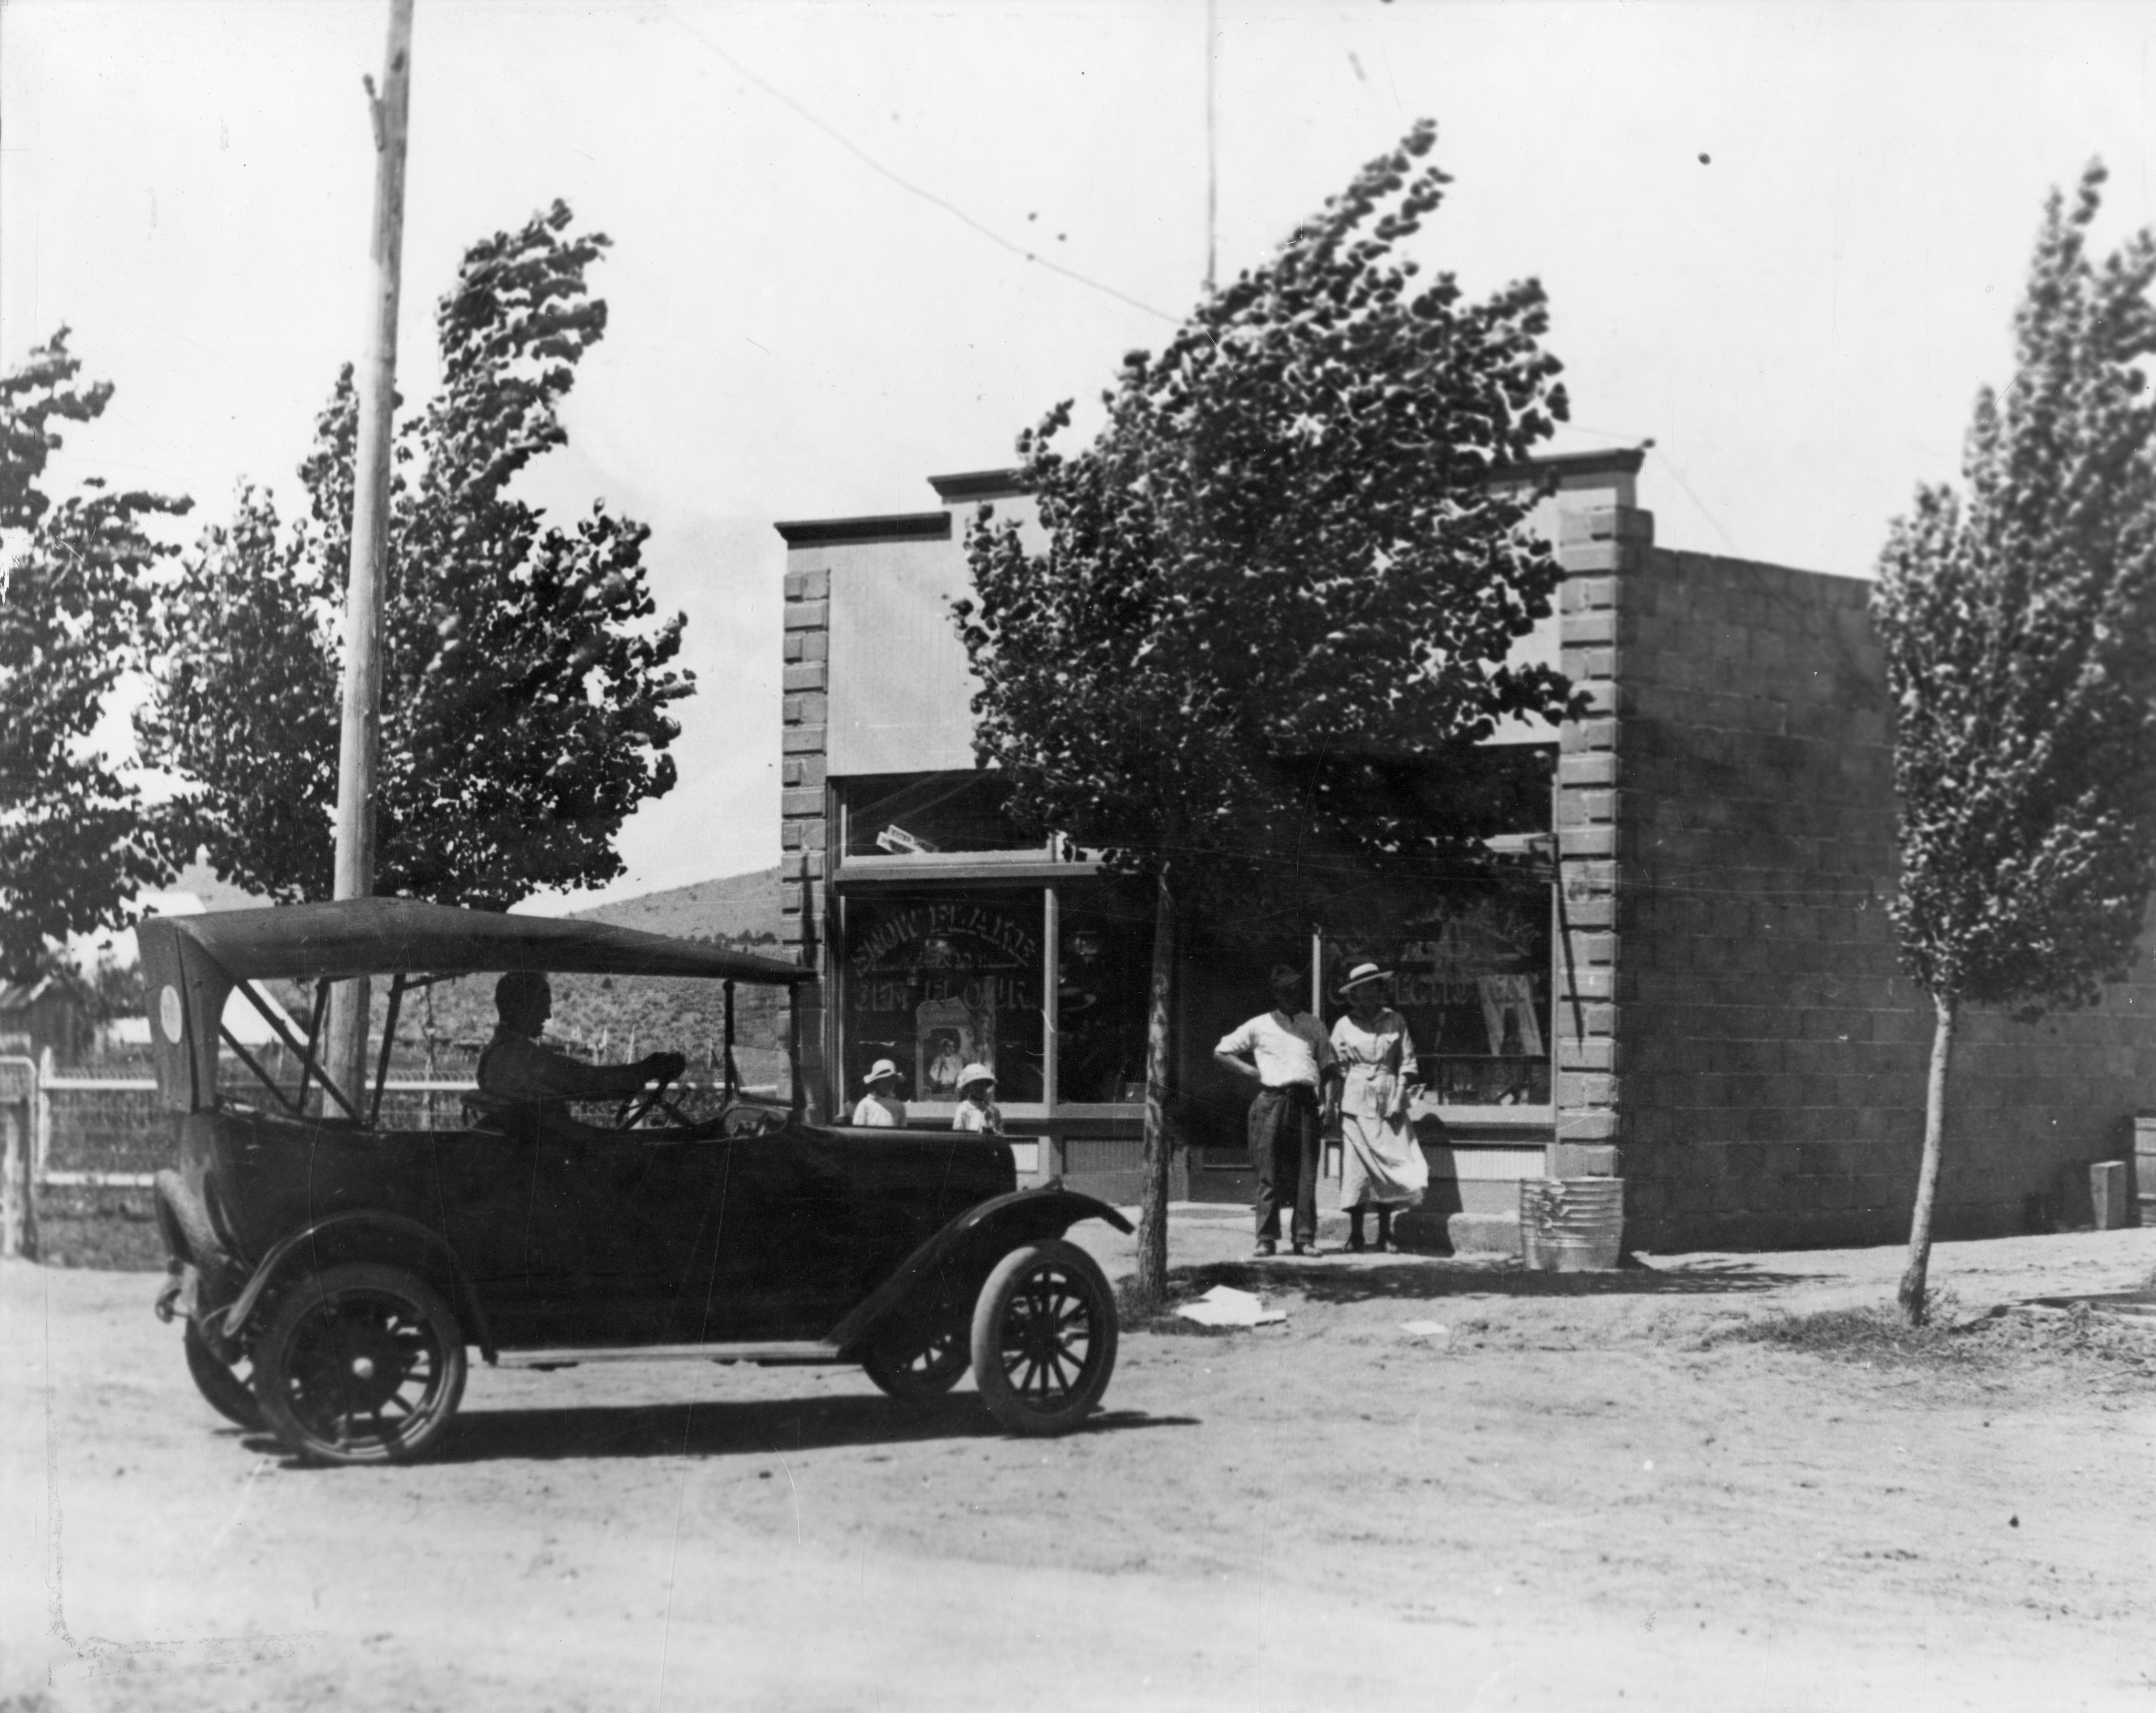 An old car in front of the Judd Store on Tabernacle in St. George